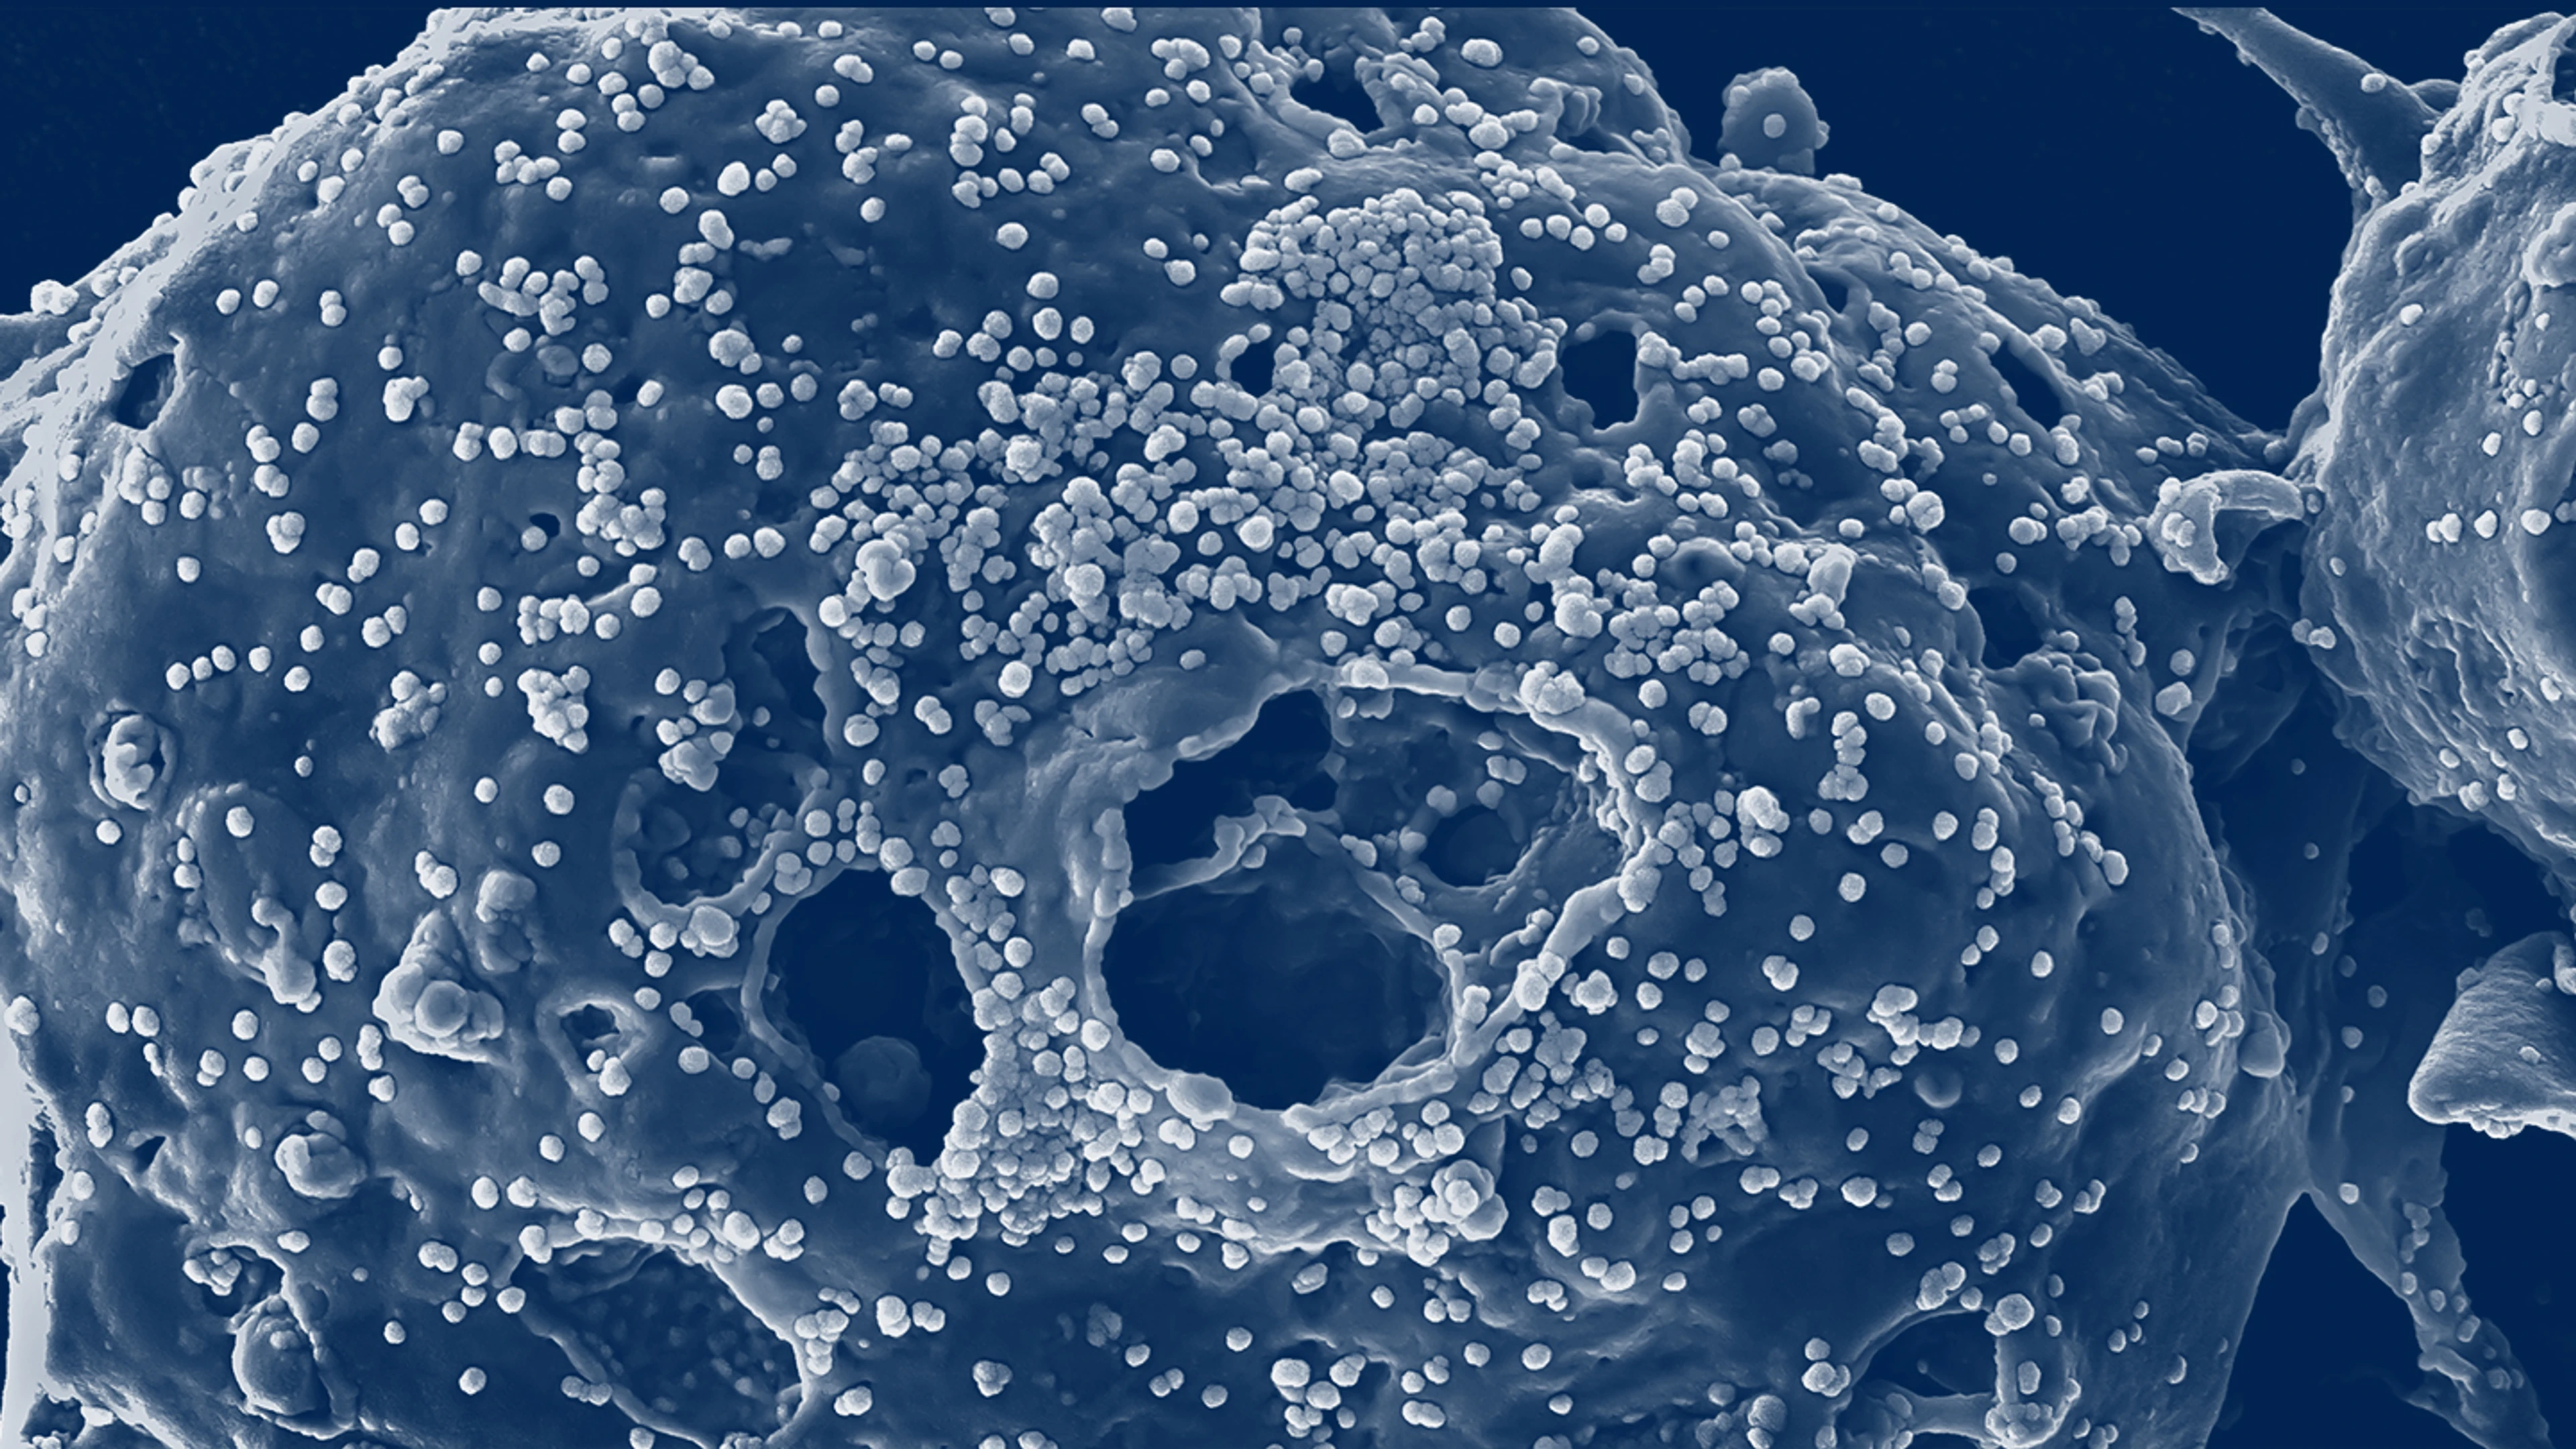 closeup of mers-cov particles with blue filter